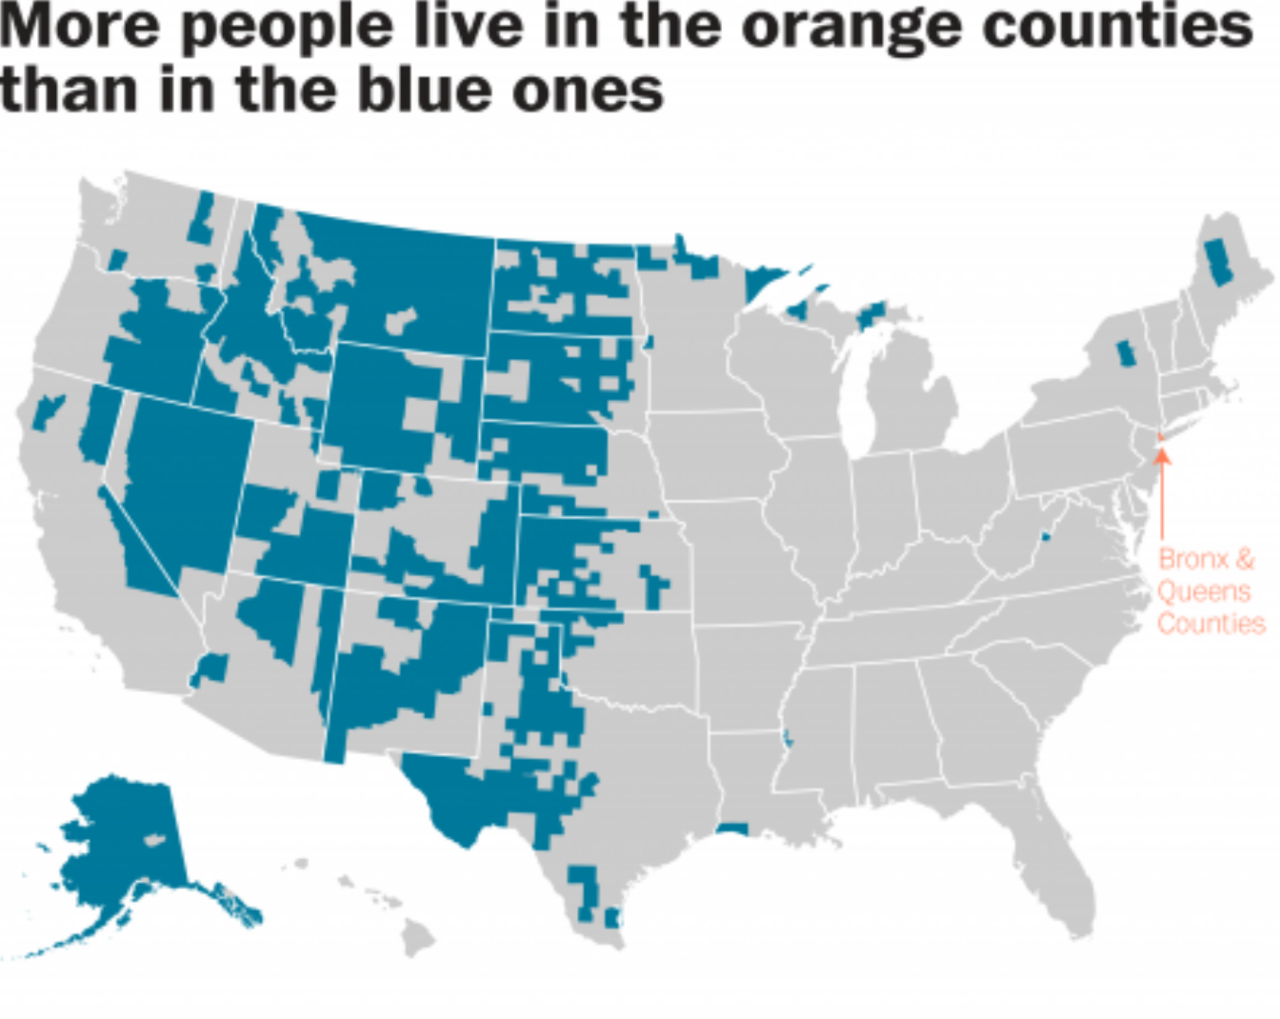 More people live in the Orange counties than in the Blue ones